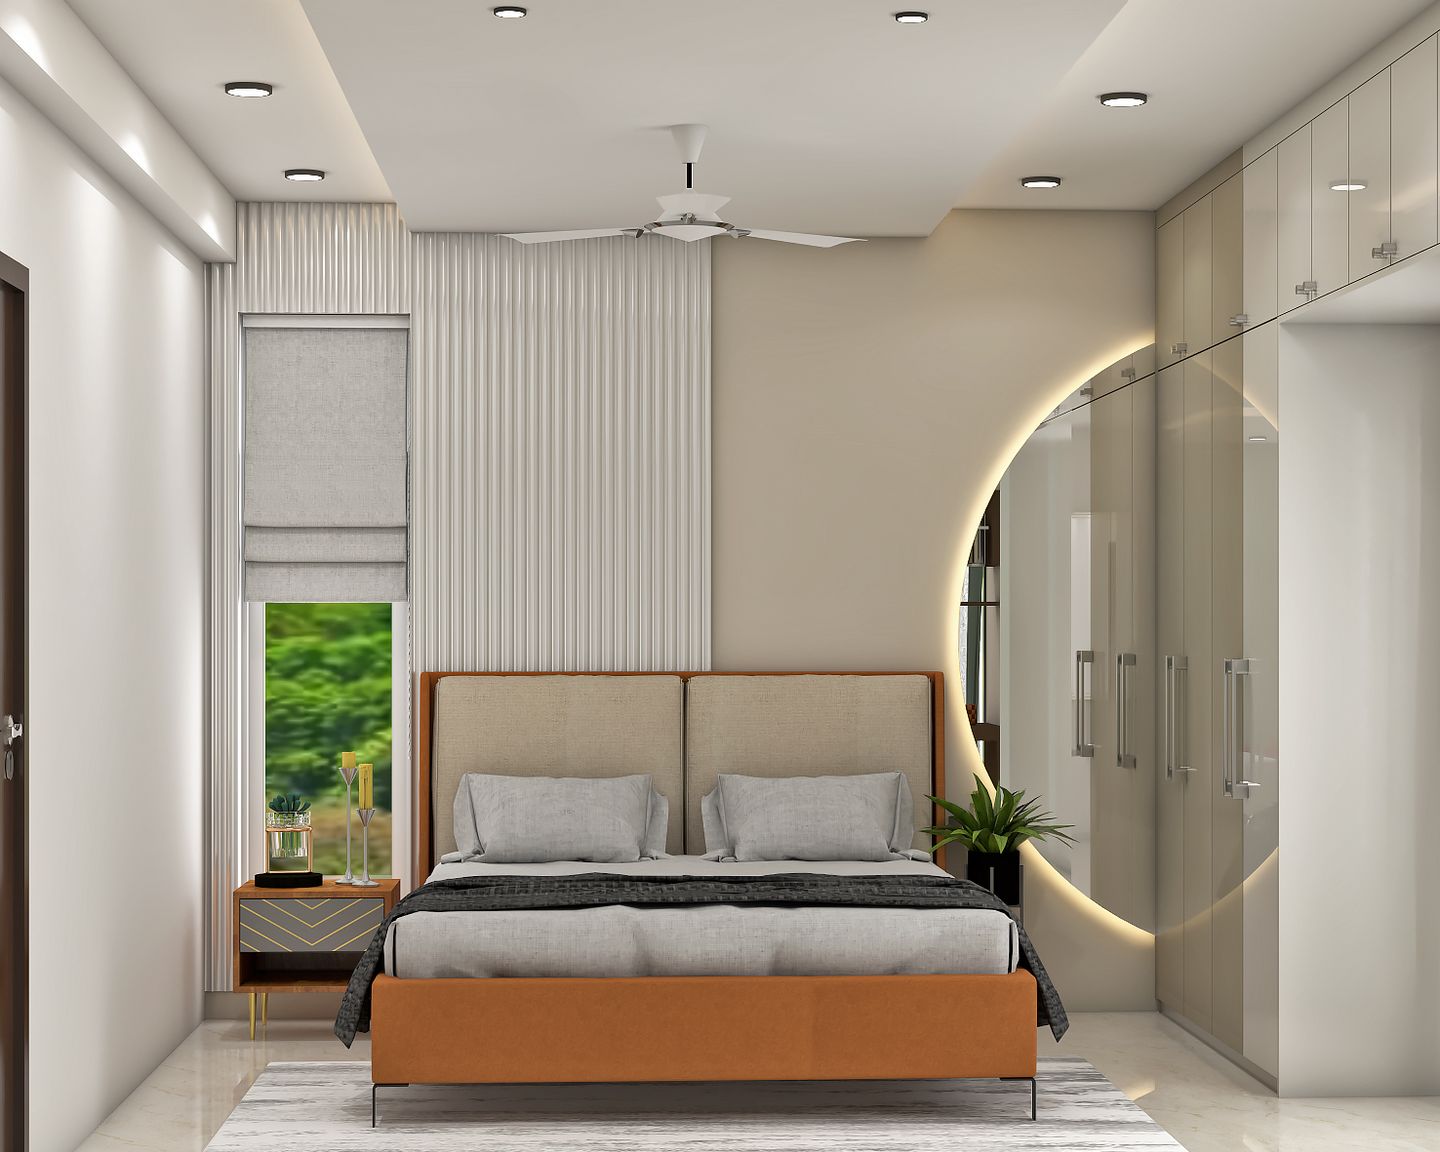 Beautiful guest bedroom design with central drop gypsum false ceiling. The room has a dual-tone solid finish wardrobe with chrome handles.